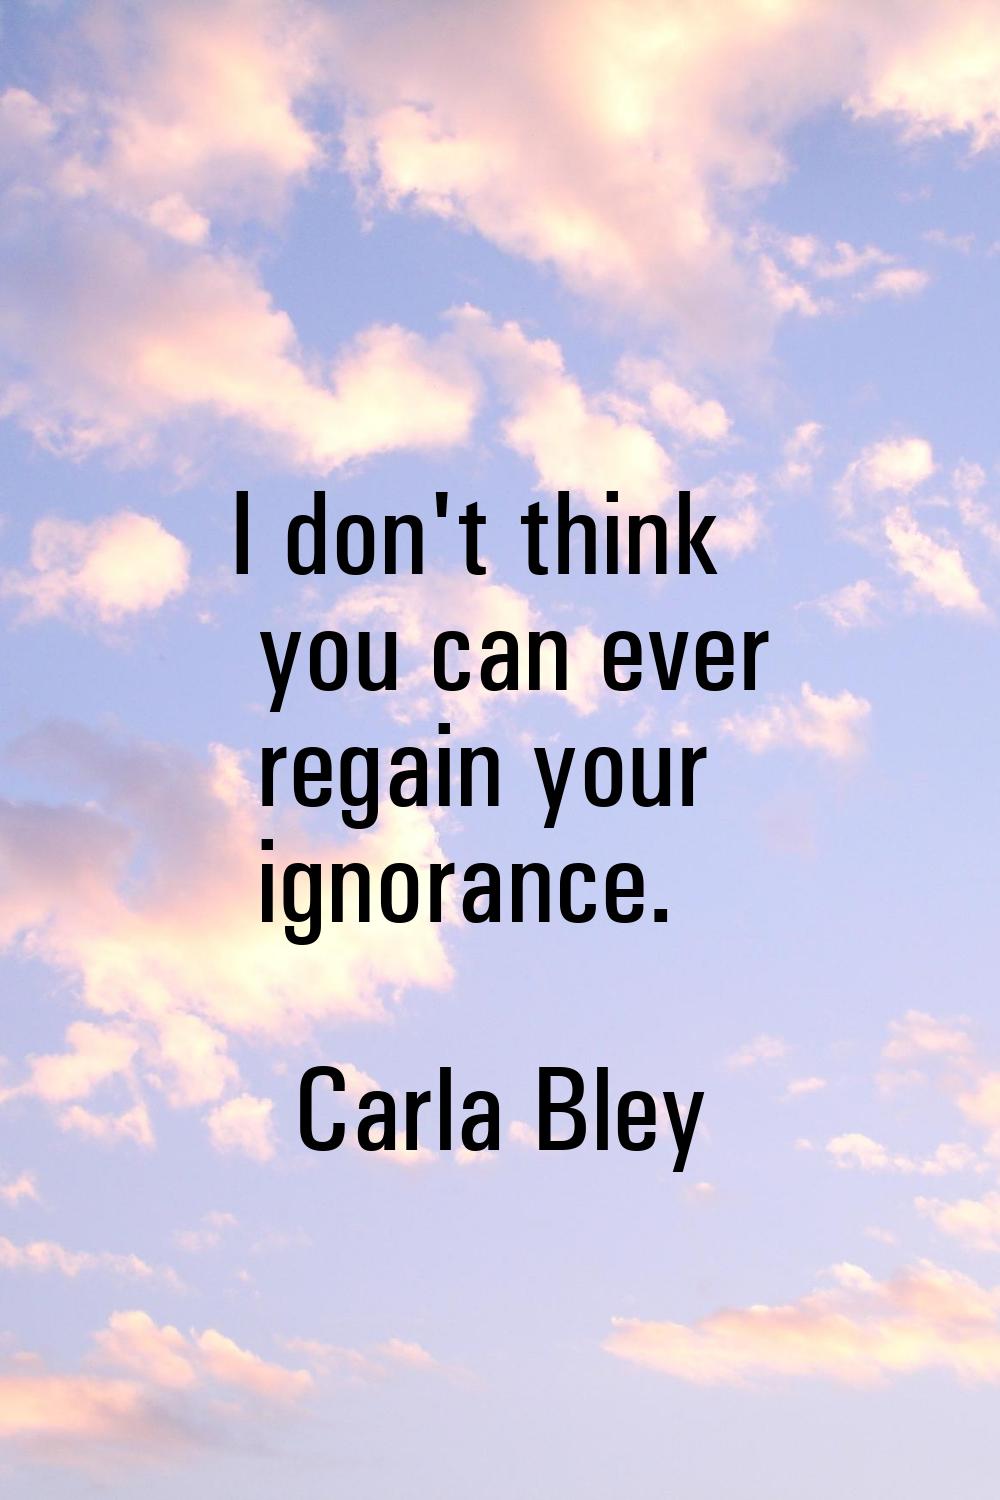 I don't think you can ever regain your ignorance.